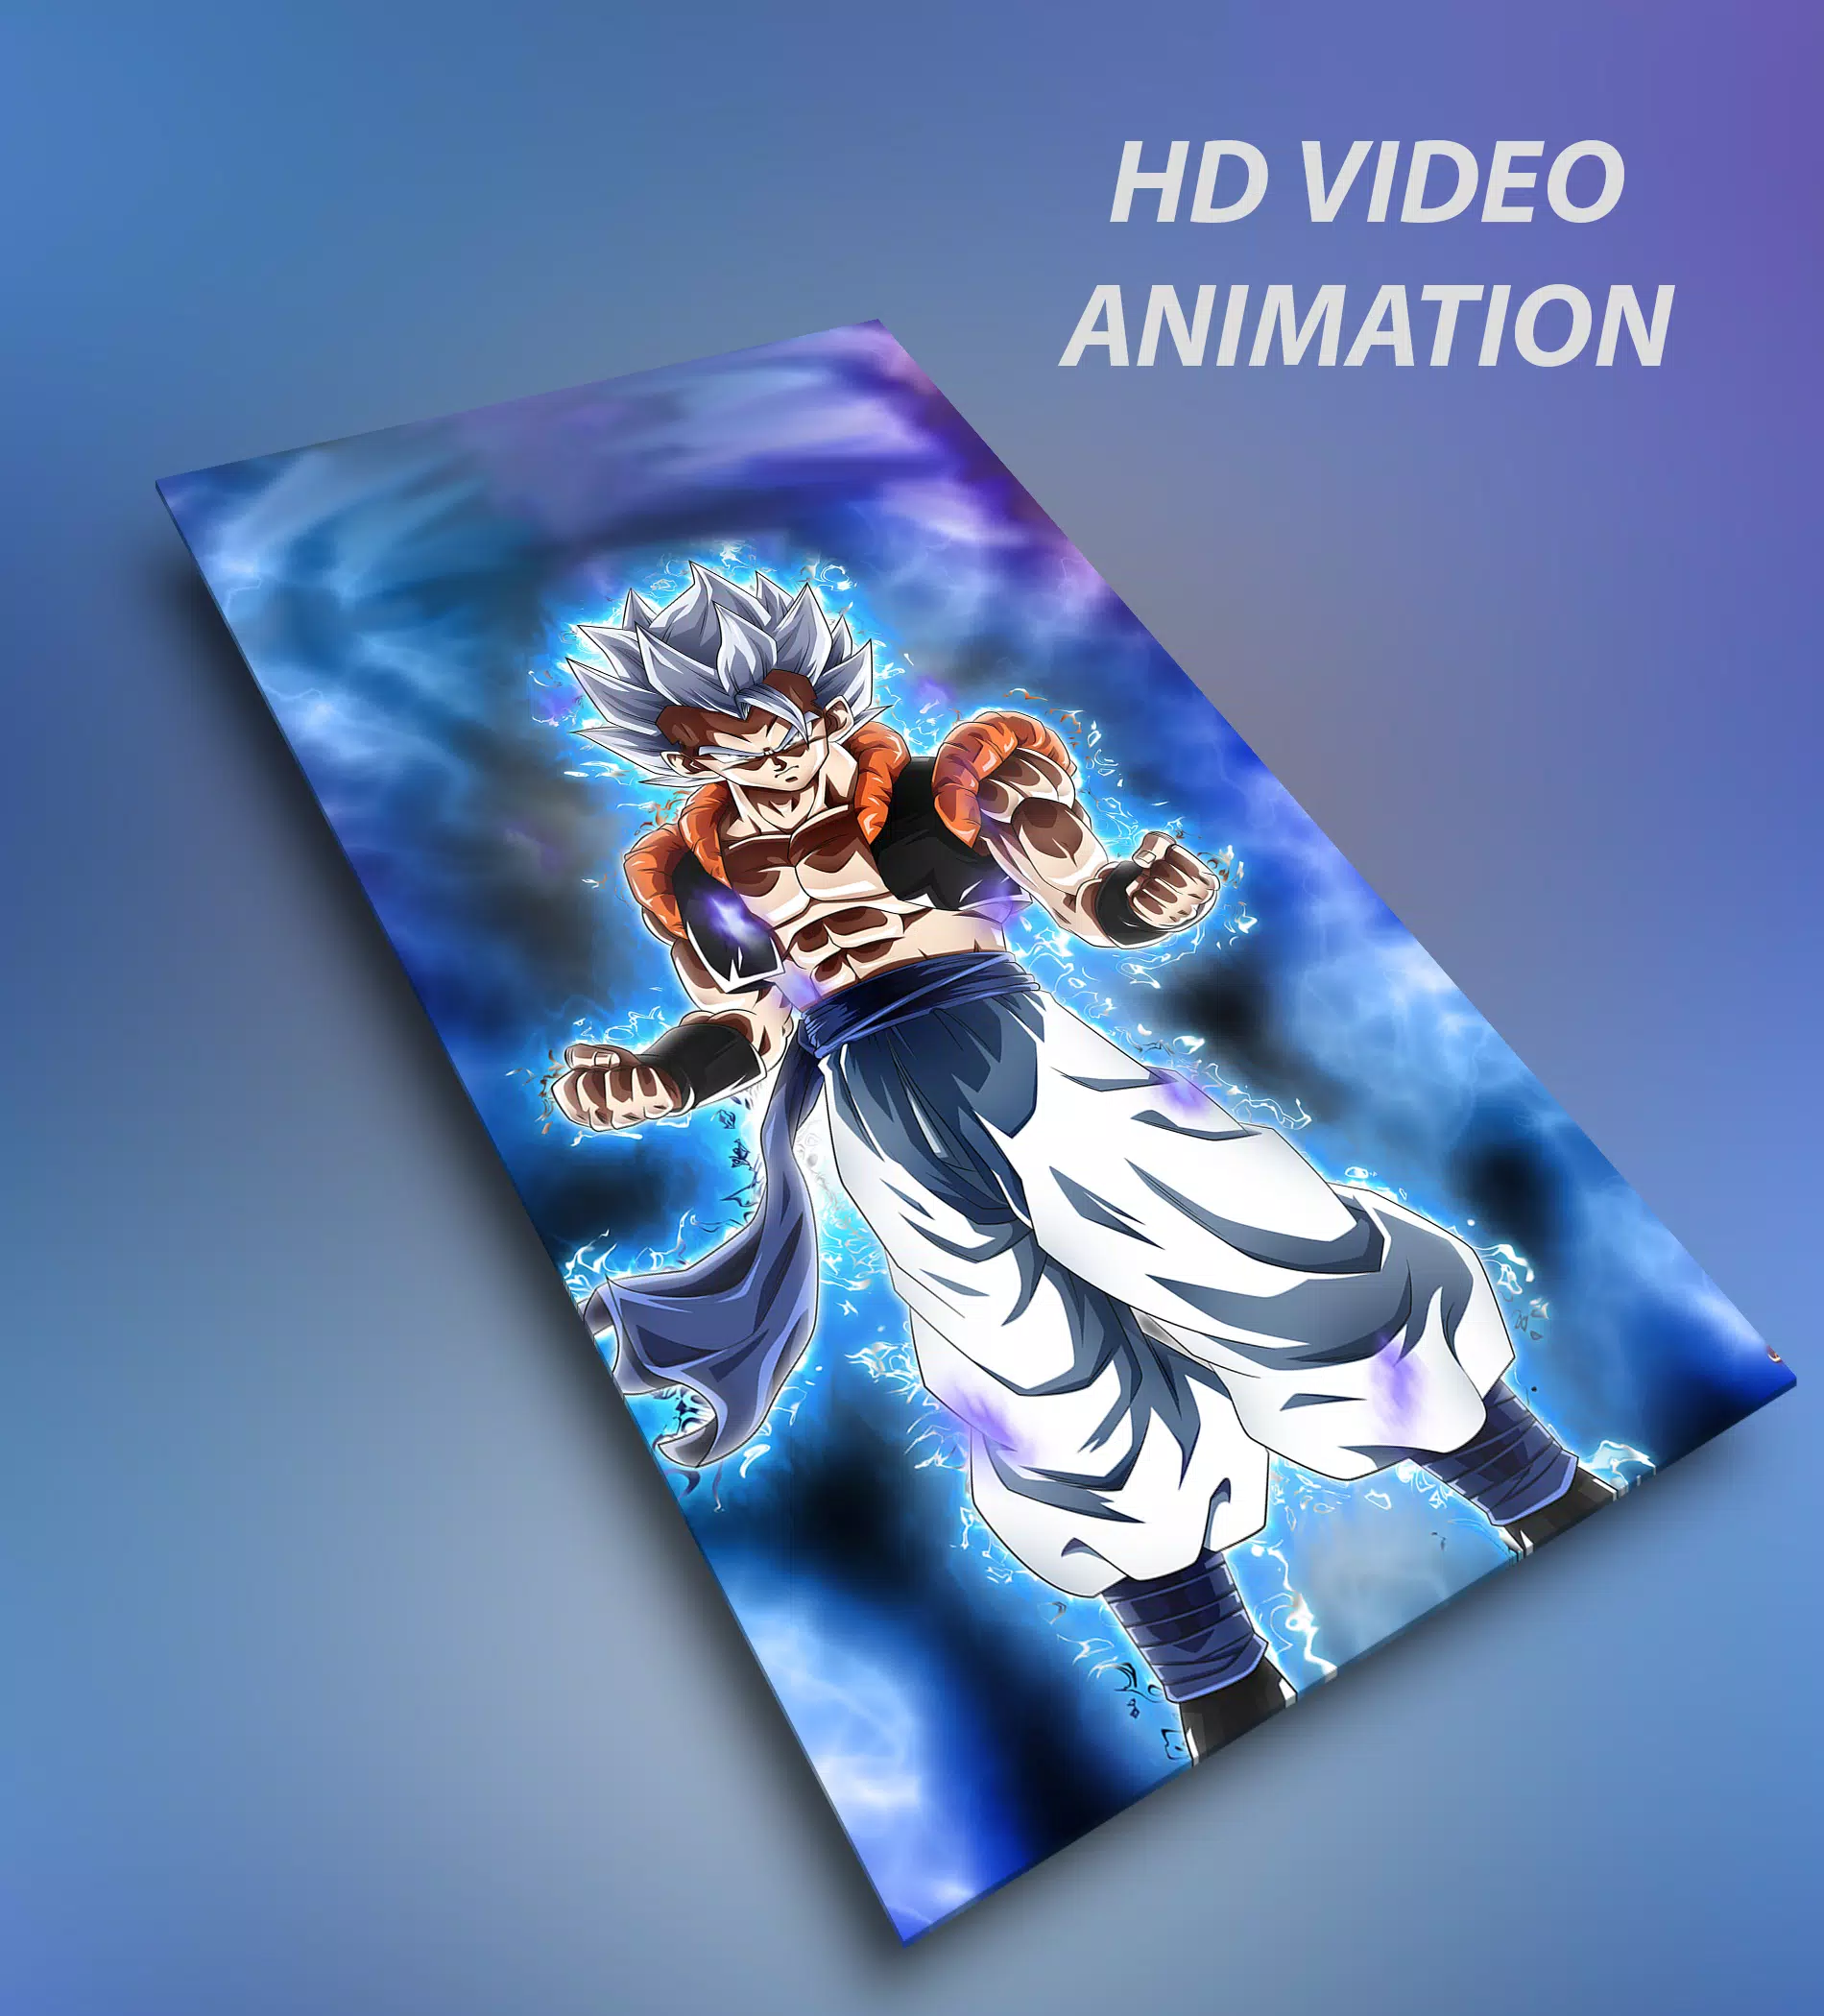 Anime live wallpaper (HD video animation) for Android - APK Download